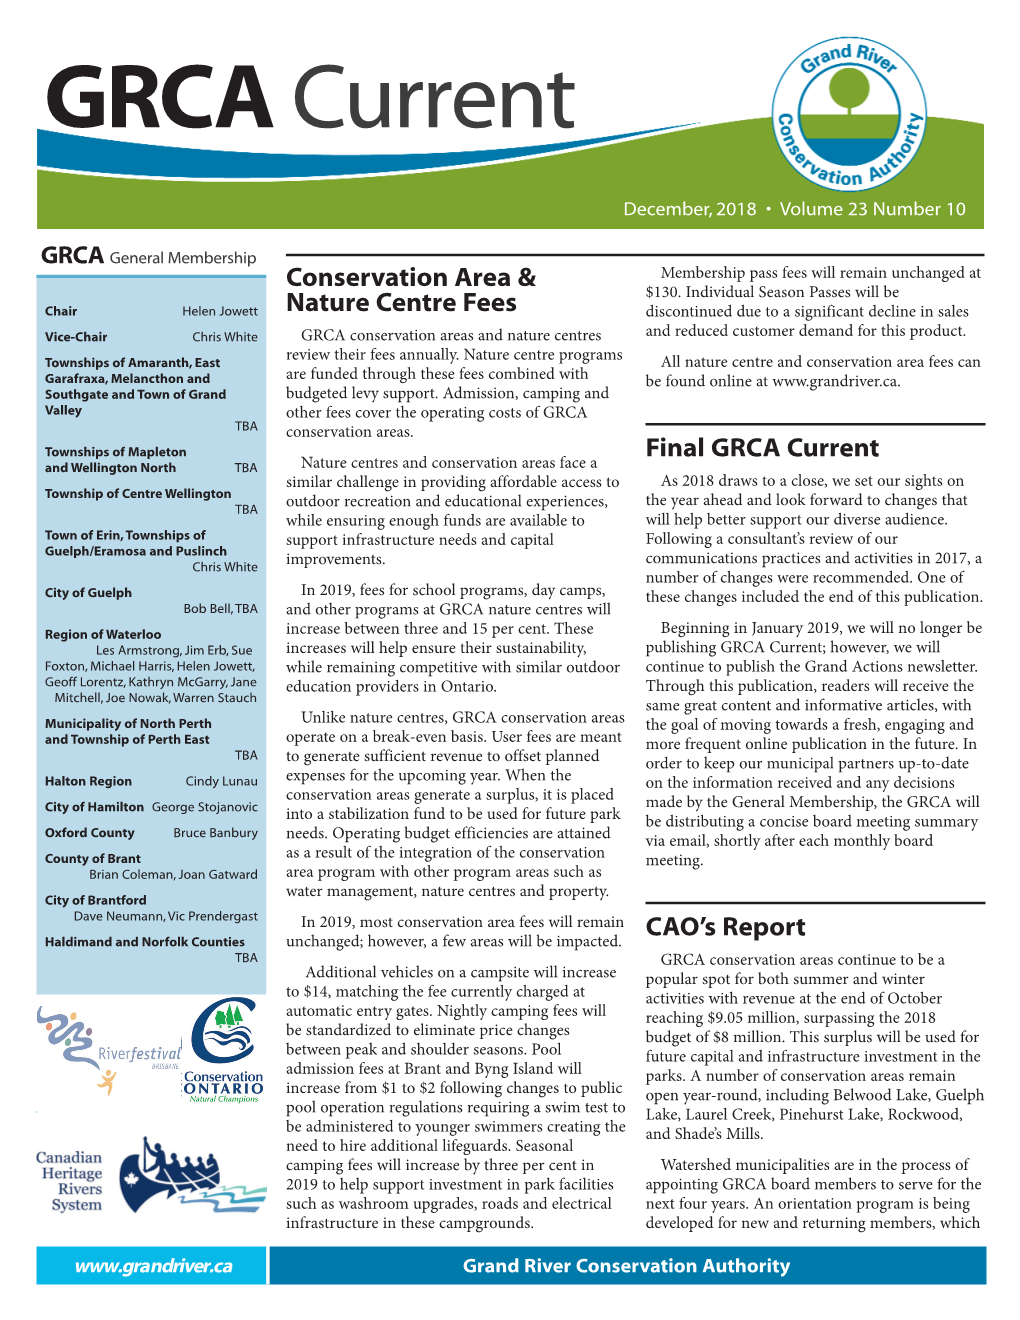 December 2018 Issue of GRCA Current